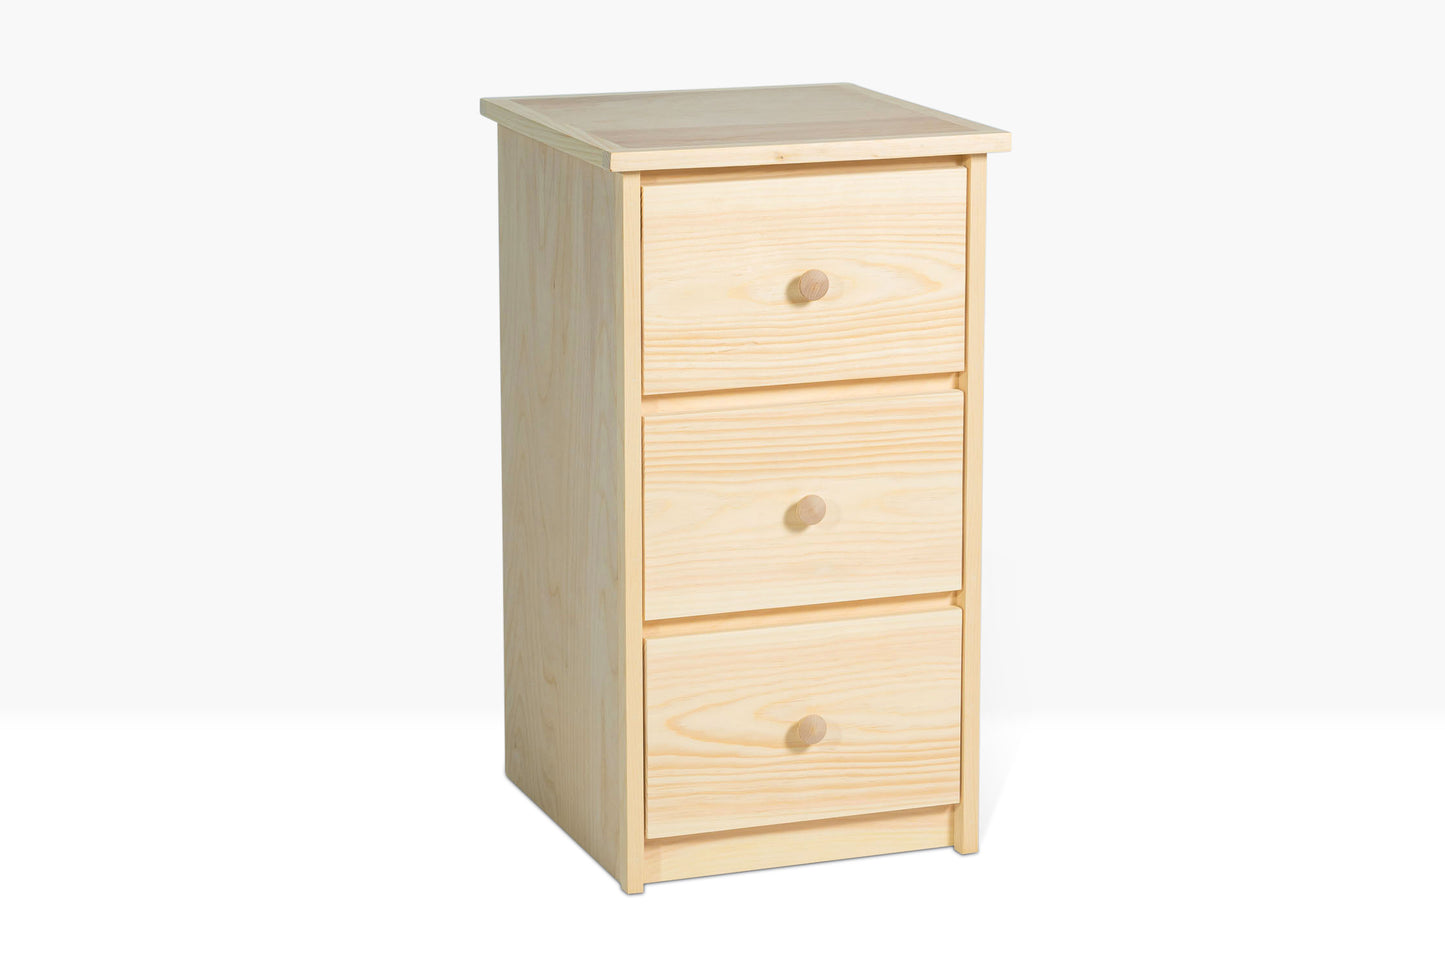 Evergreen Three Drawer Nightstand shown from side angle to show details of pine construction. Shown unfinished.